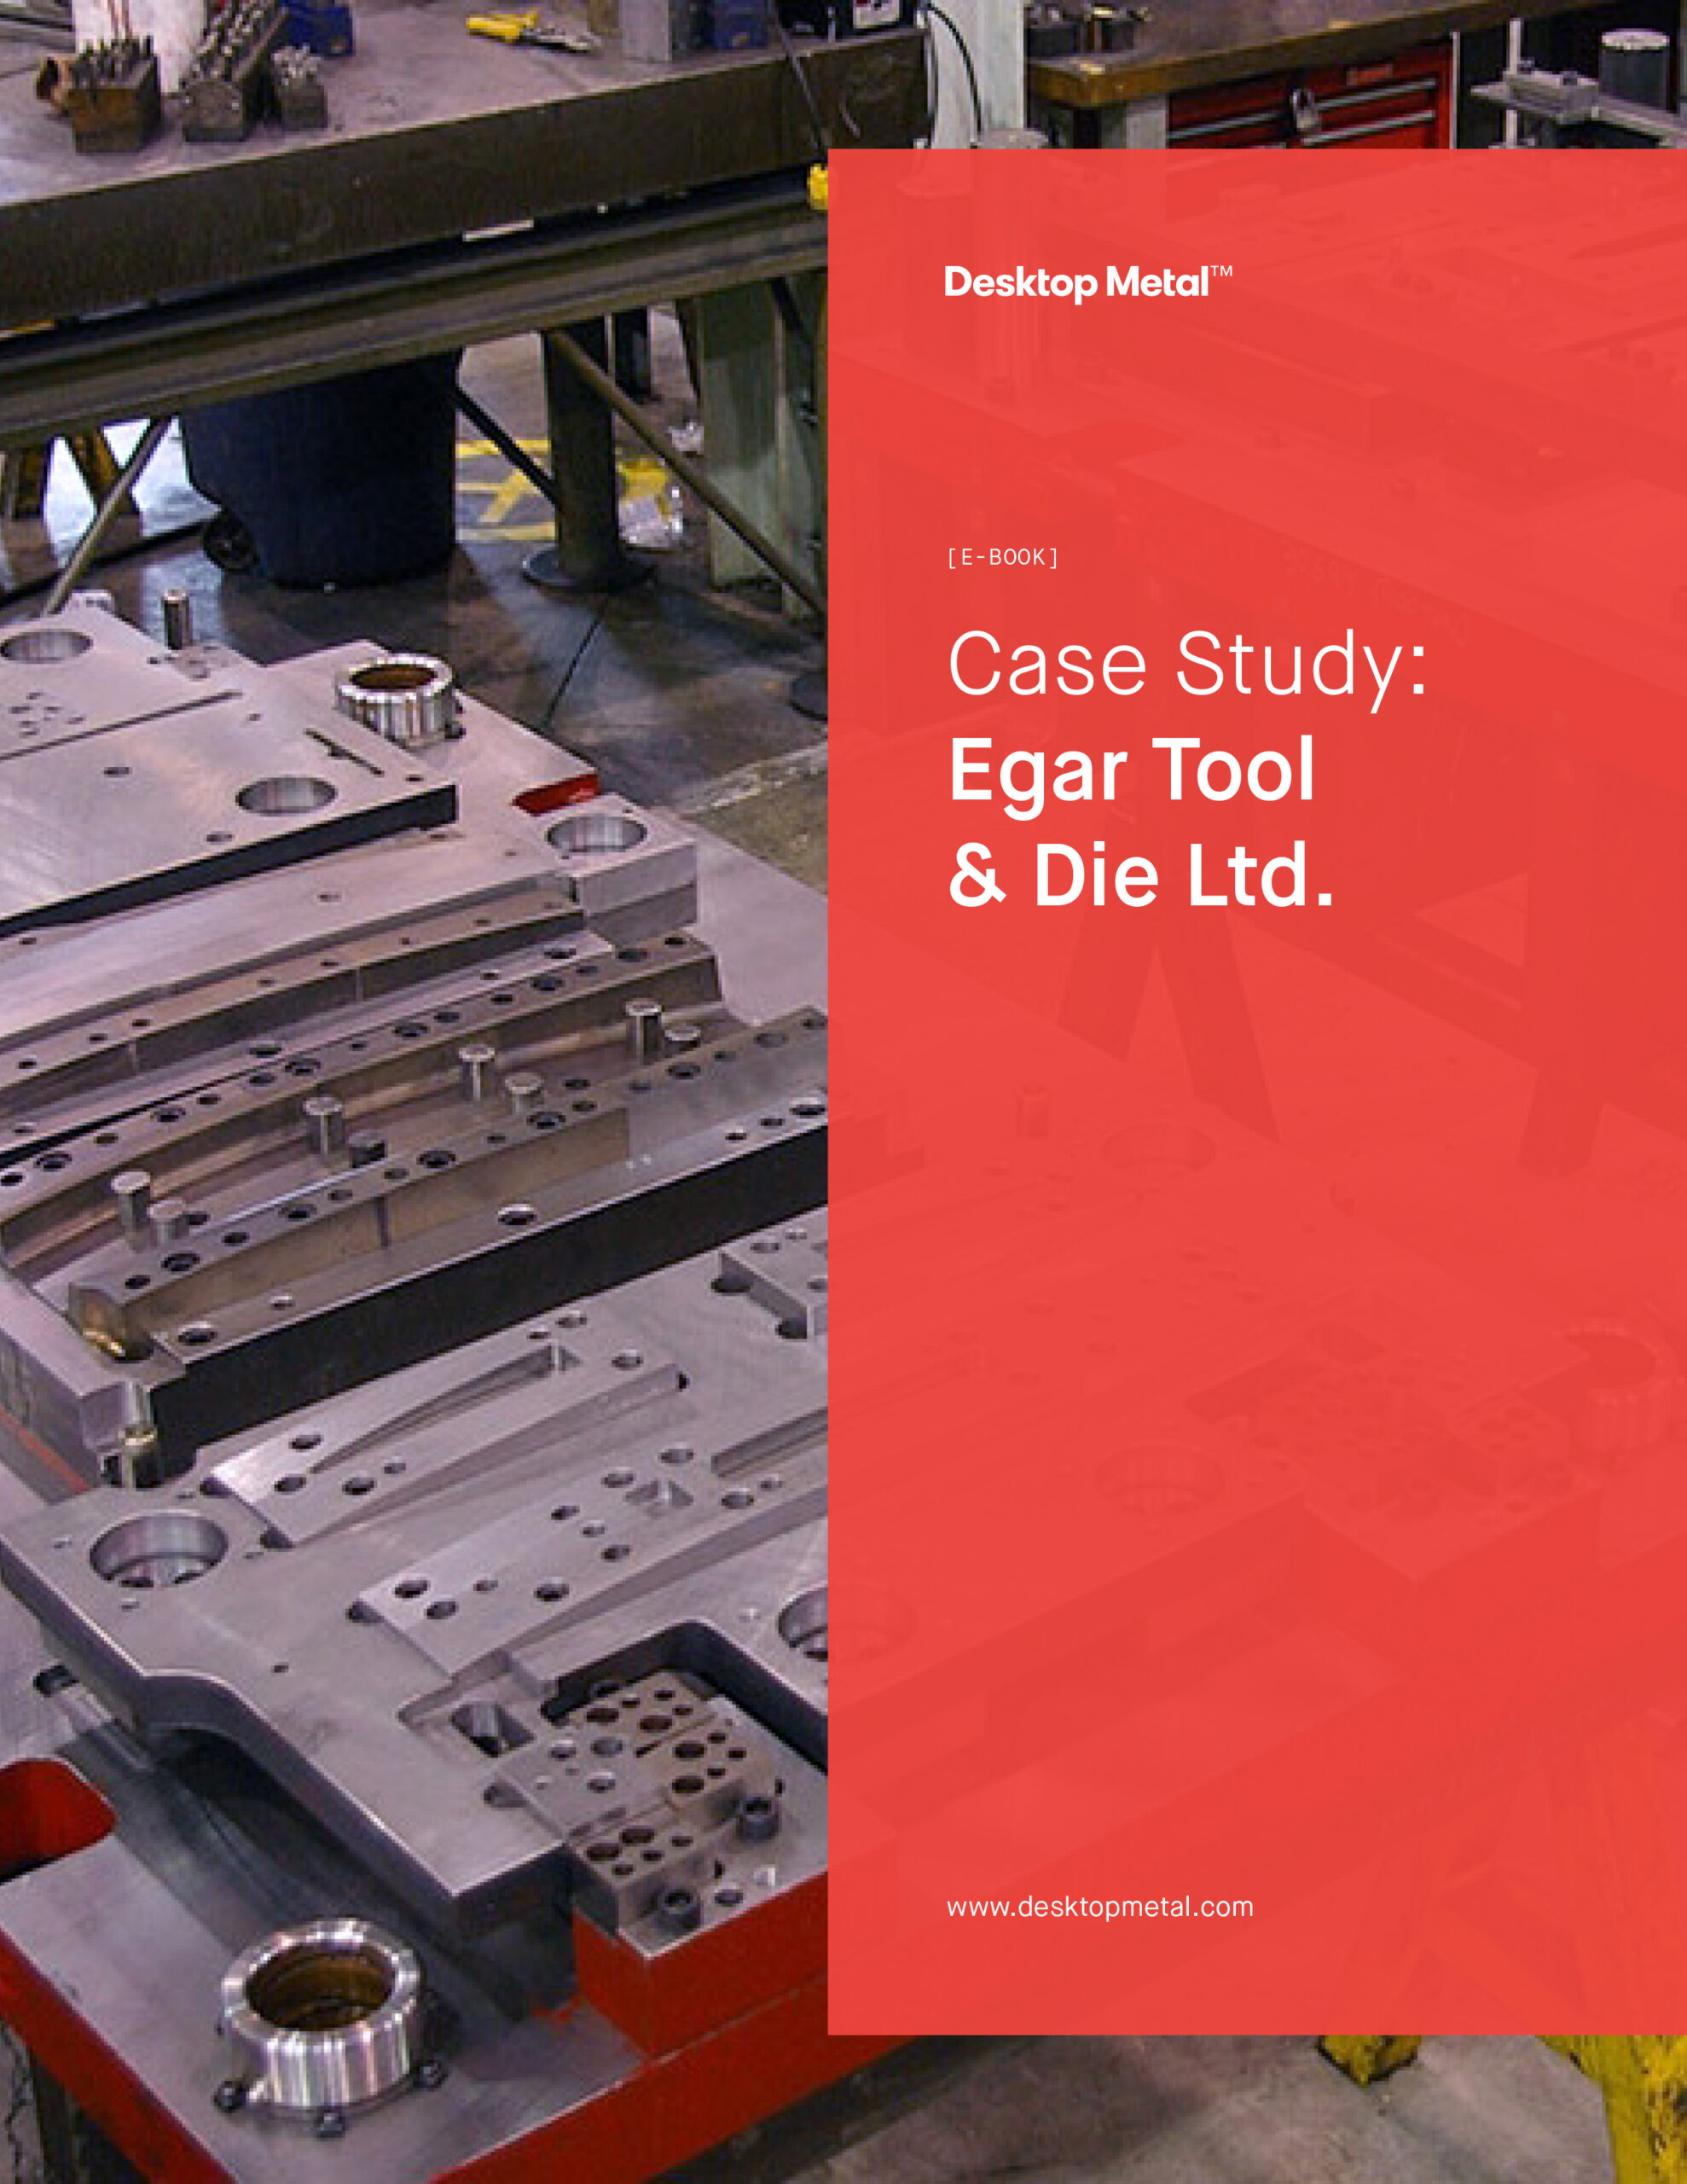 Case Study about Egar Tool and Die, Ltd, and how they are 3D printing metal end-of-arm tooling and die prototypes with a Desktop Metal Studio System 3D printer